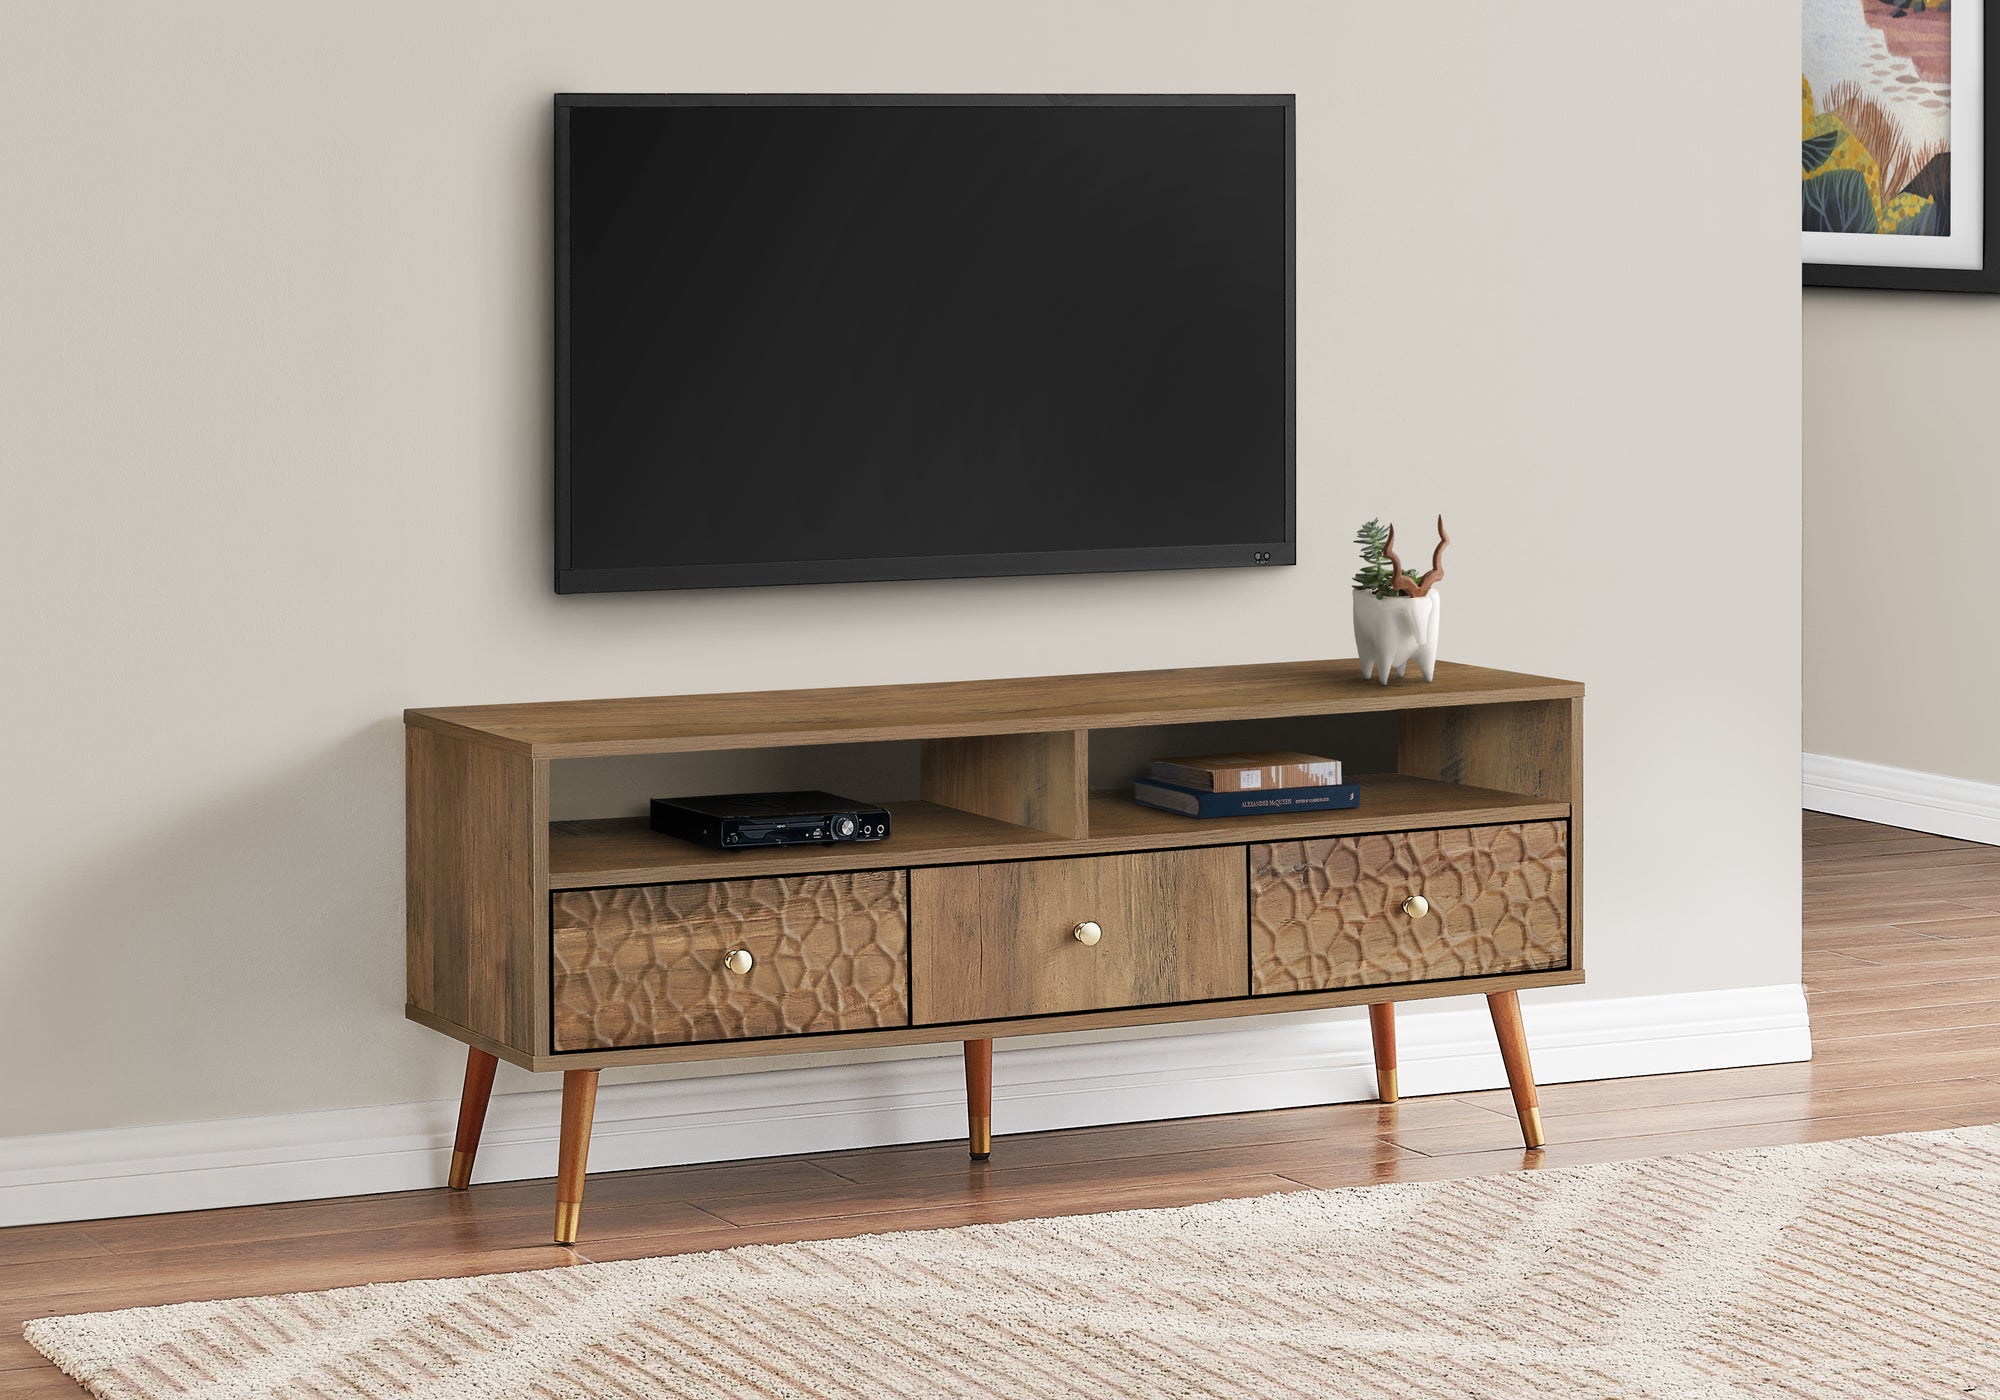 MN-492835    Tv Stand, 48 Inch, Console, Media Entertainment Center, Storage Cabinet, Living Room, Bedroom, Solid Wood Legs, Laminate, Walnut, Contemporary, Modern